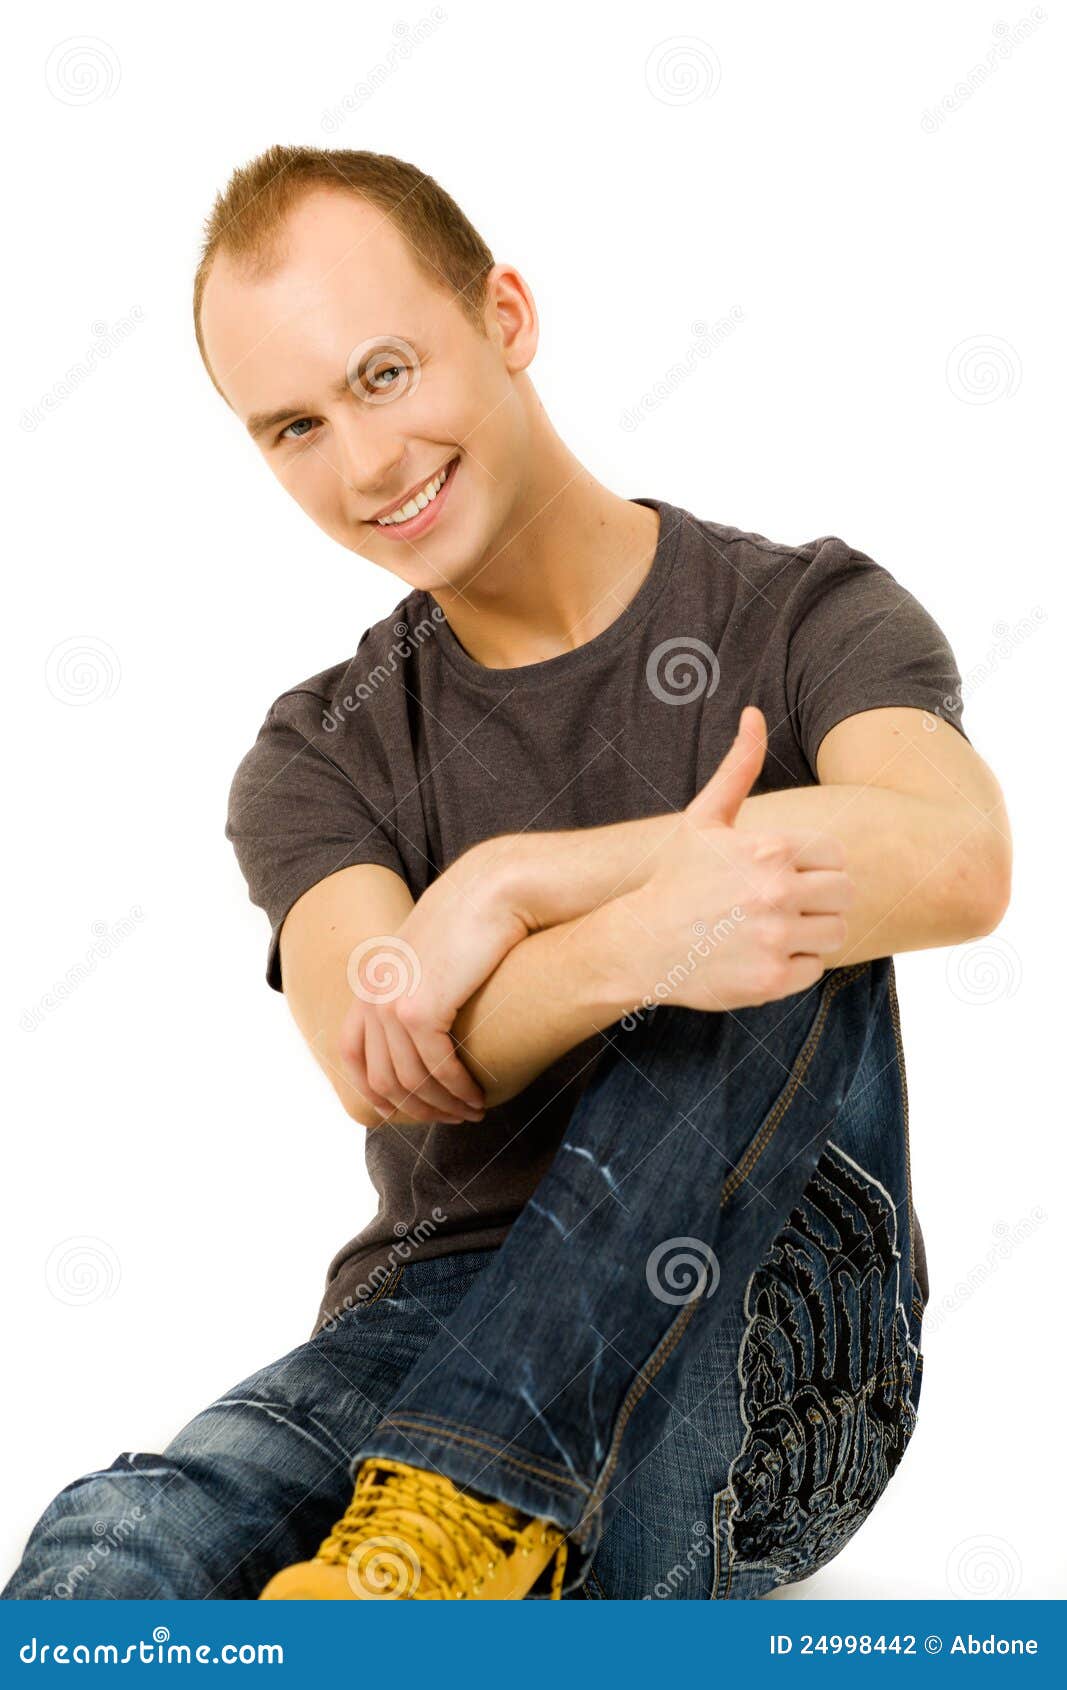 Young man portrait. Young man sits and smiling friendly with hands on his knees on white background